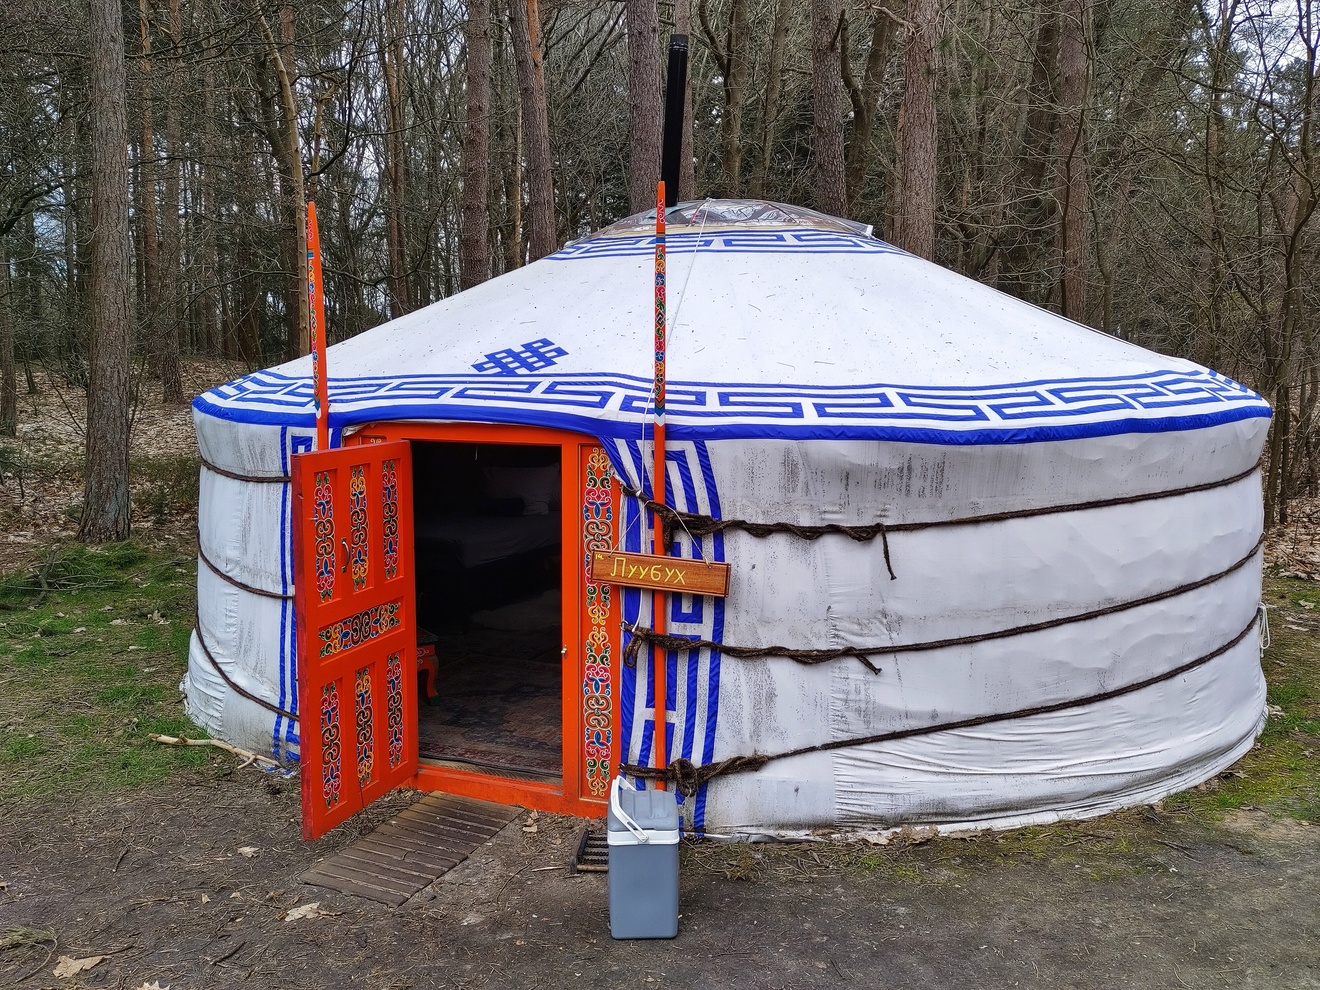 Our yurt, number 14